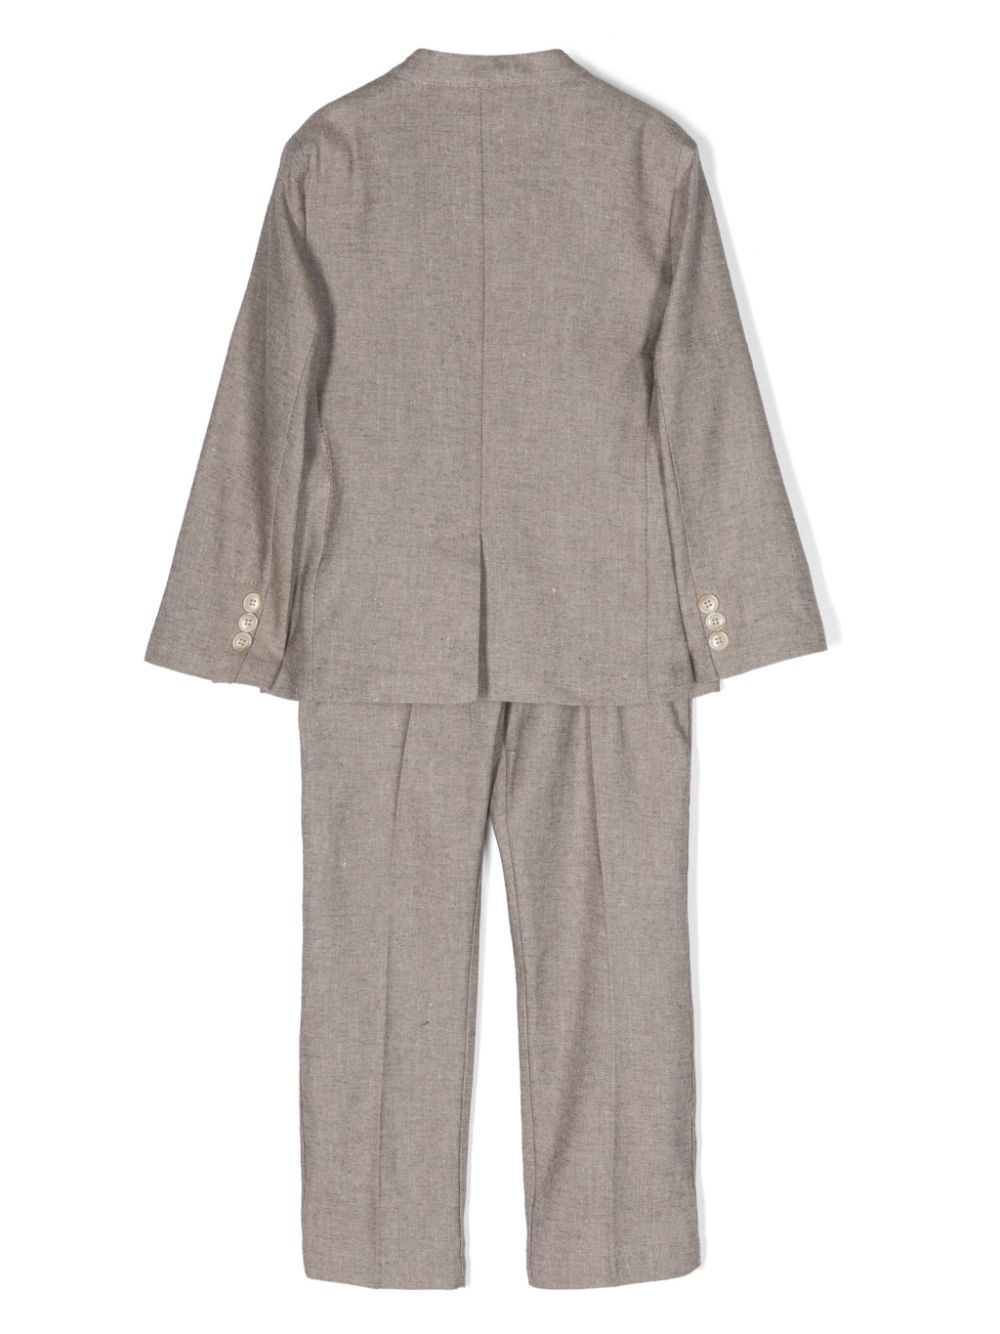 Image 2 of Paolo Pecora Kids single-breasted linen blend suit